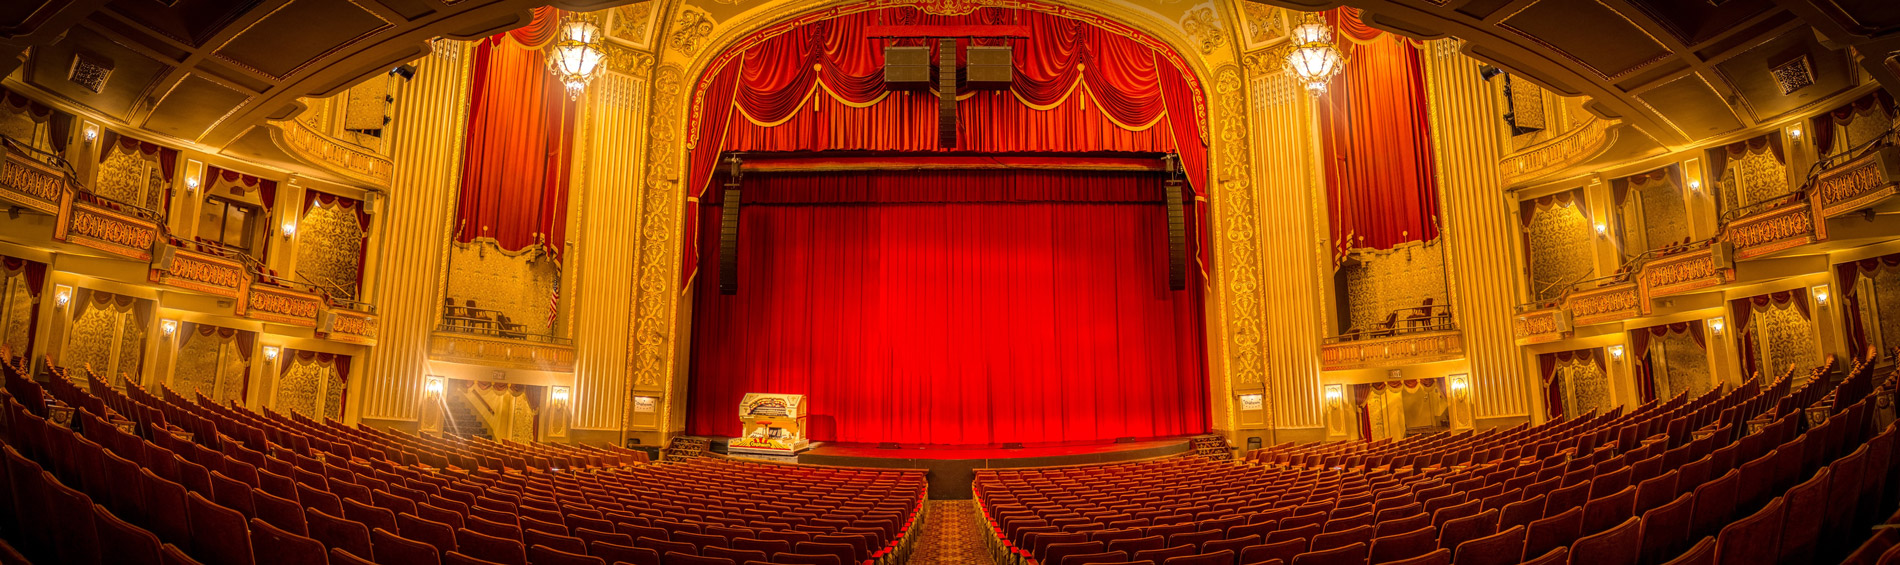 Wide lens view of the stage curtains